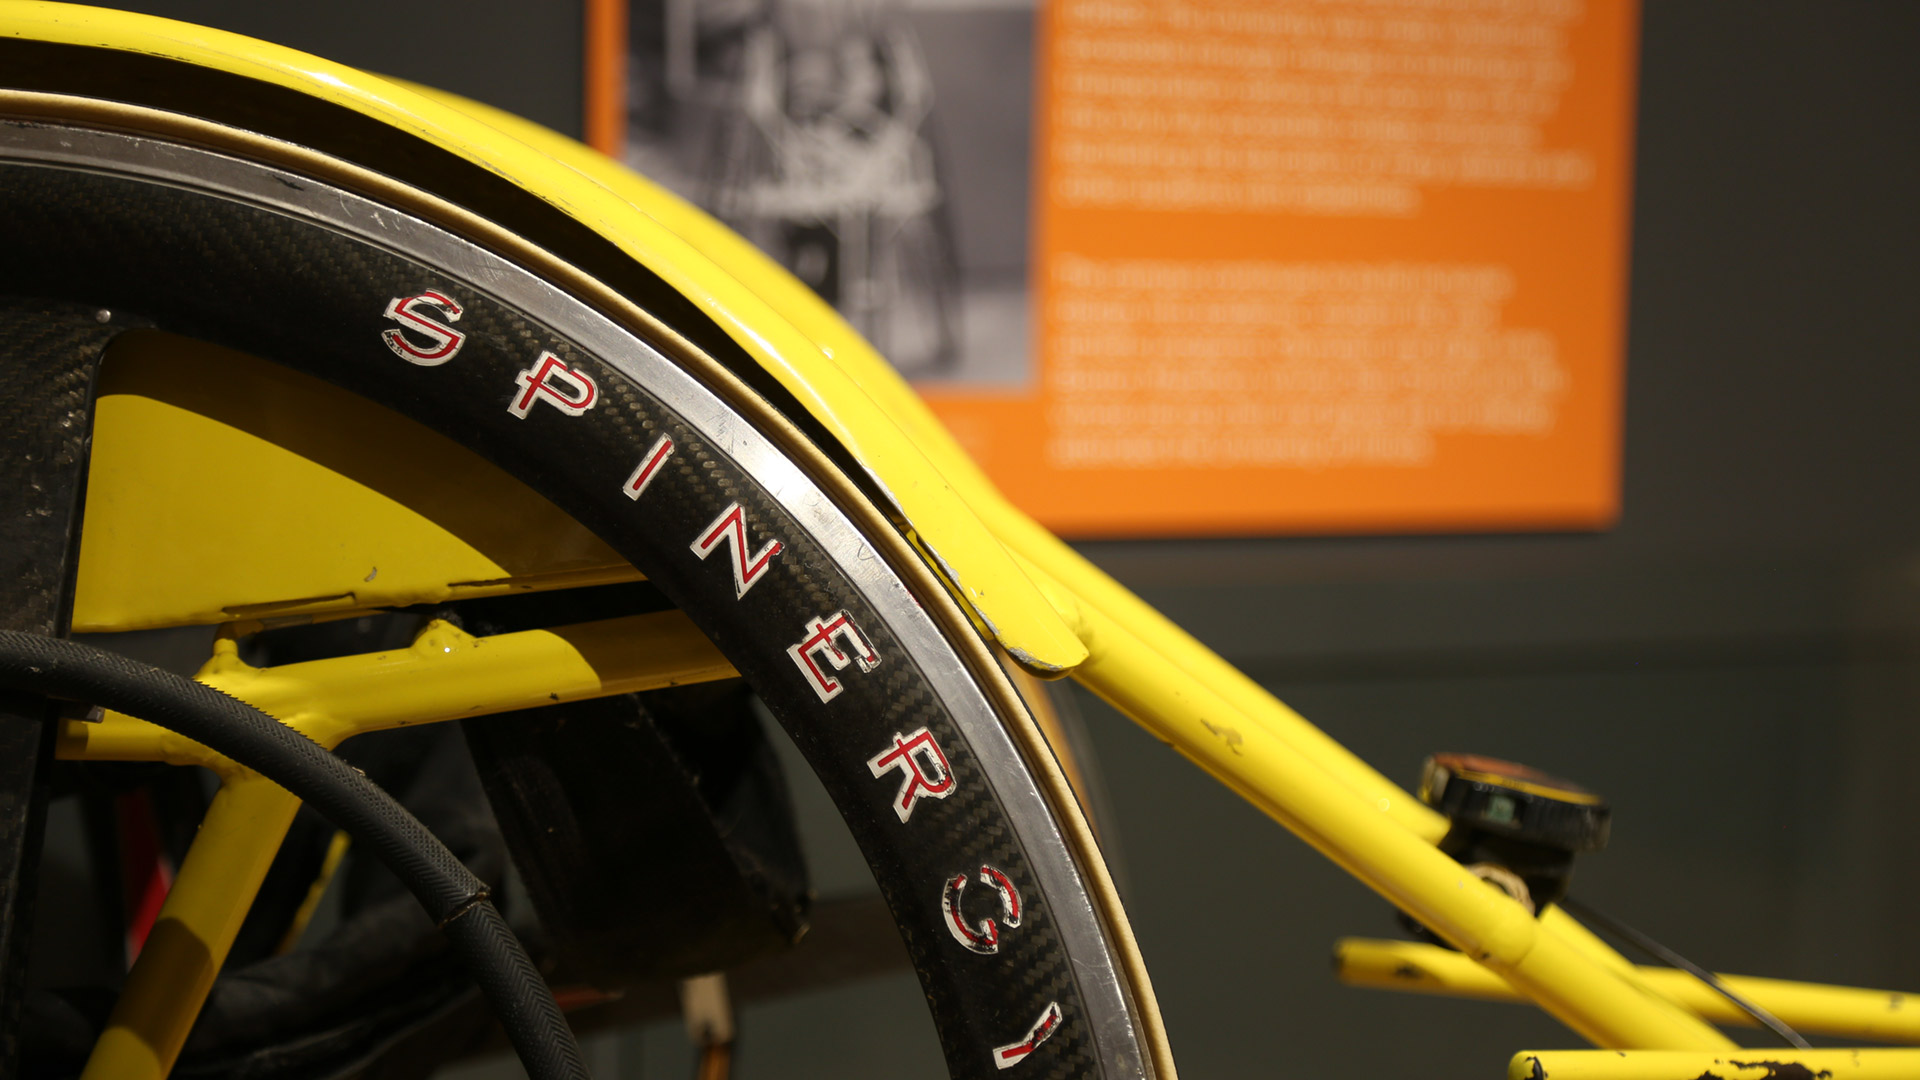 close-up shot of the bike's tire